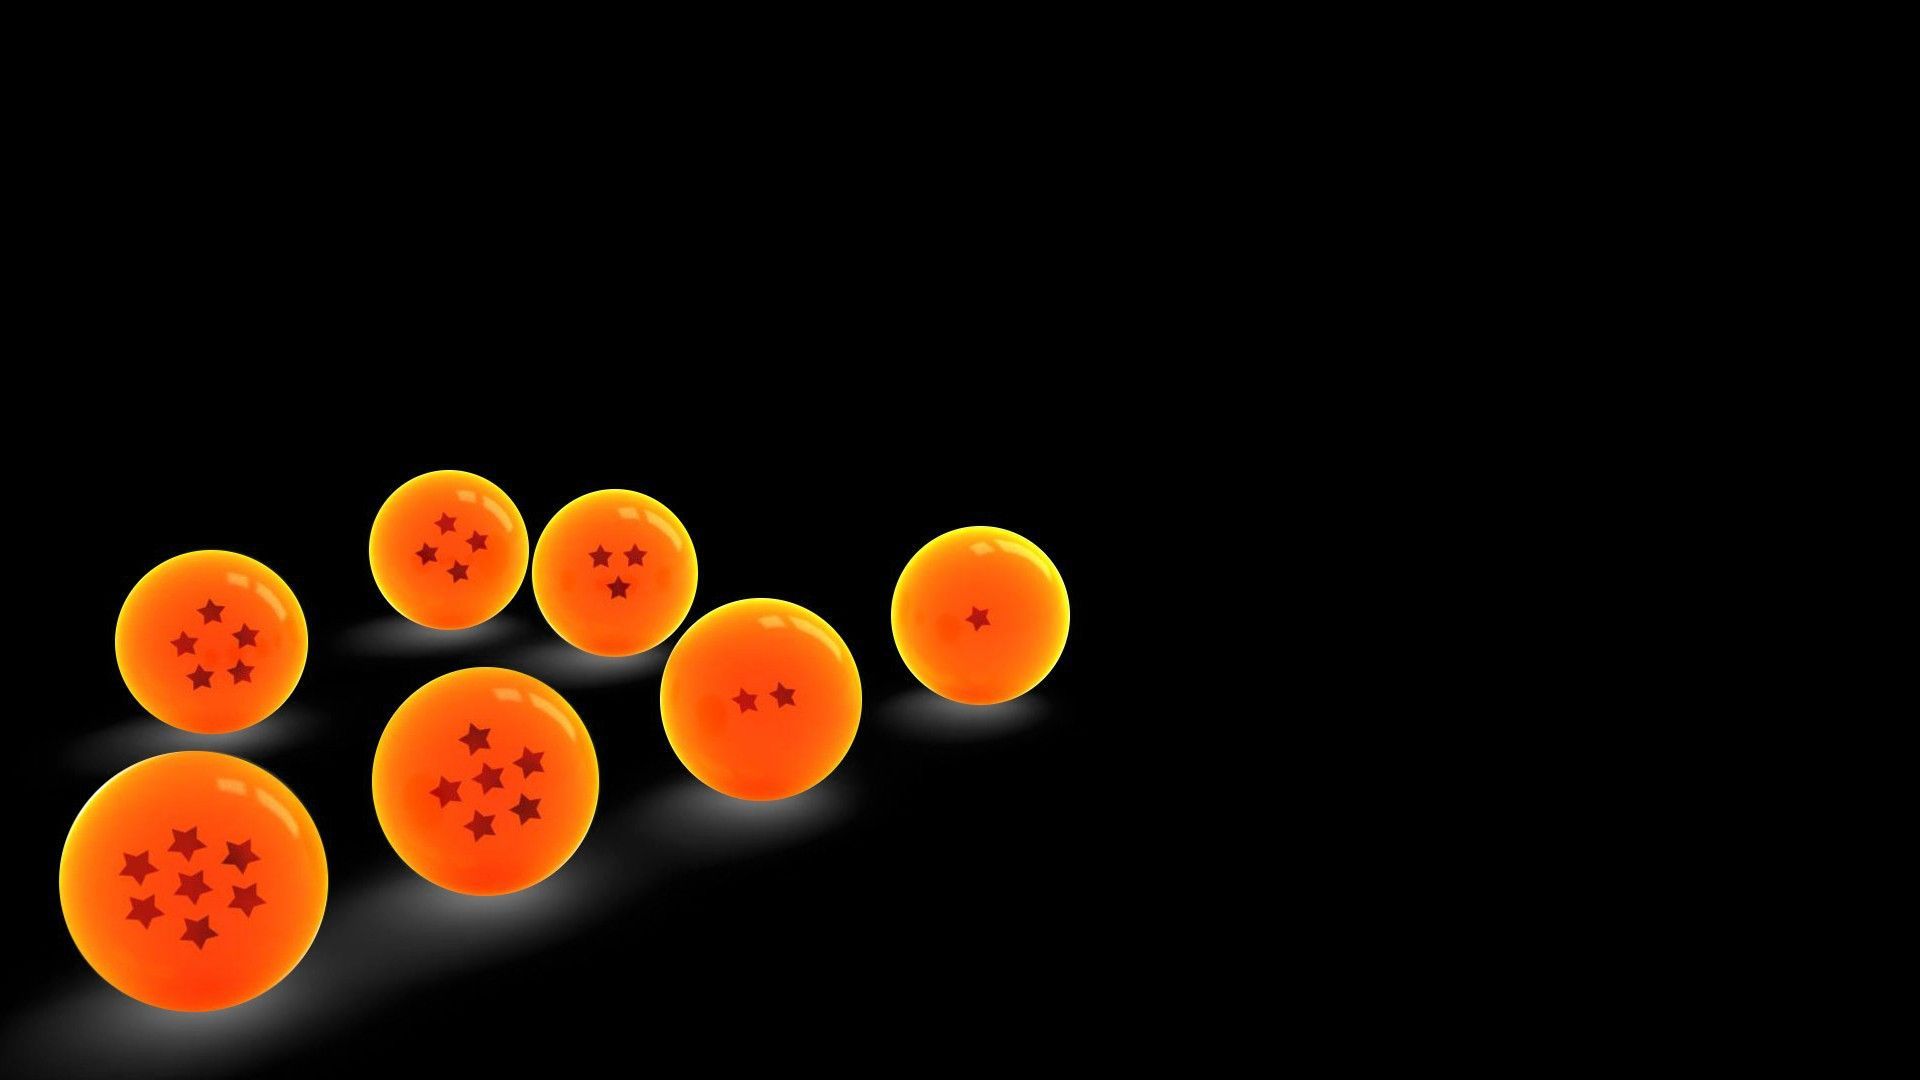 Orange balls on a black background wallpapers and images